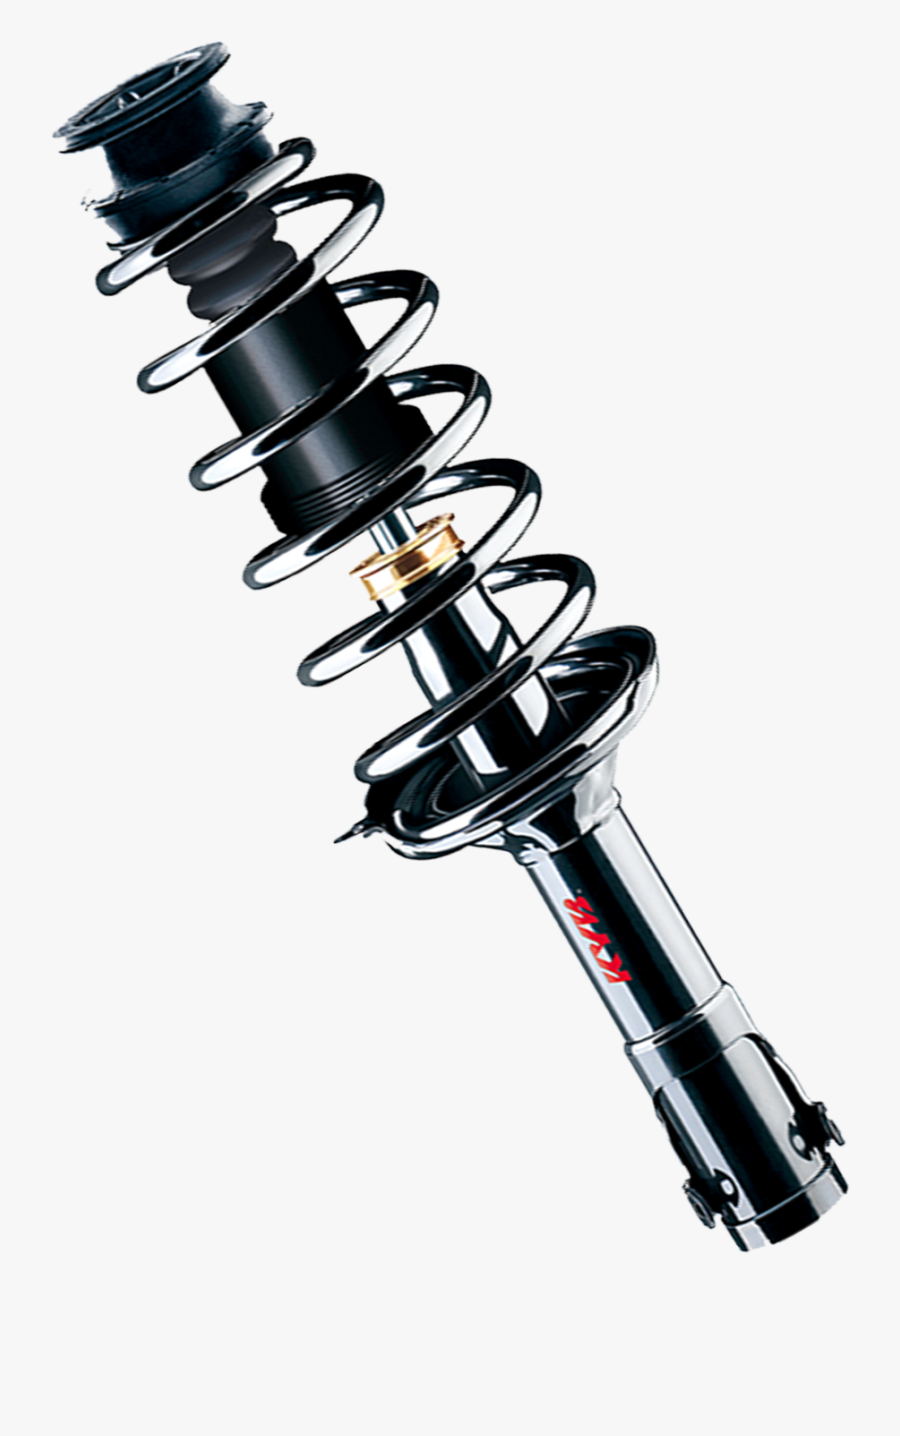 Kyb Tena Force Shock Absorbers Image, Transparent Clipart